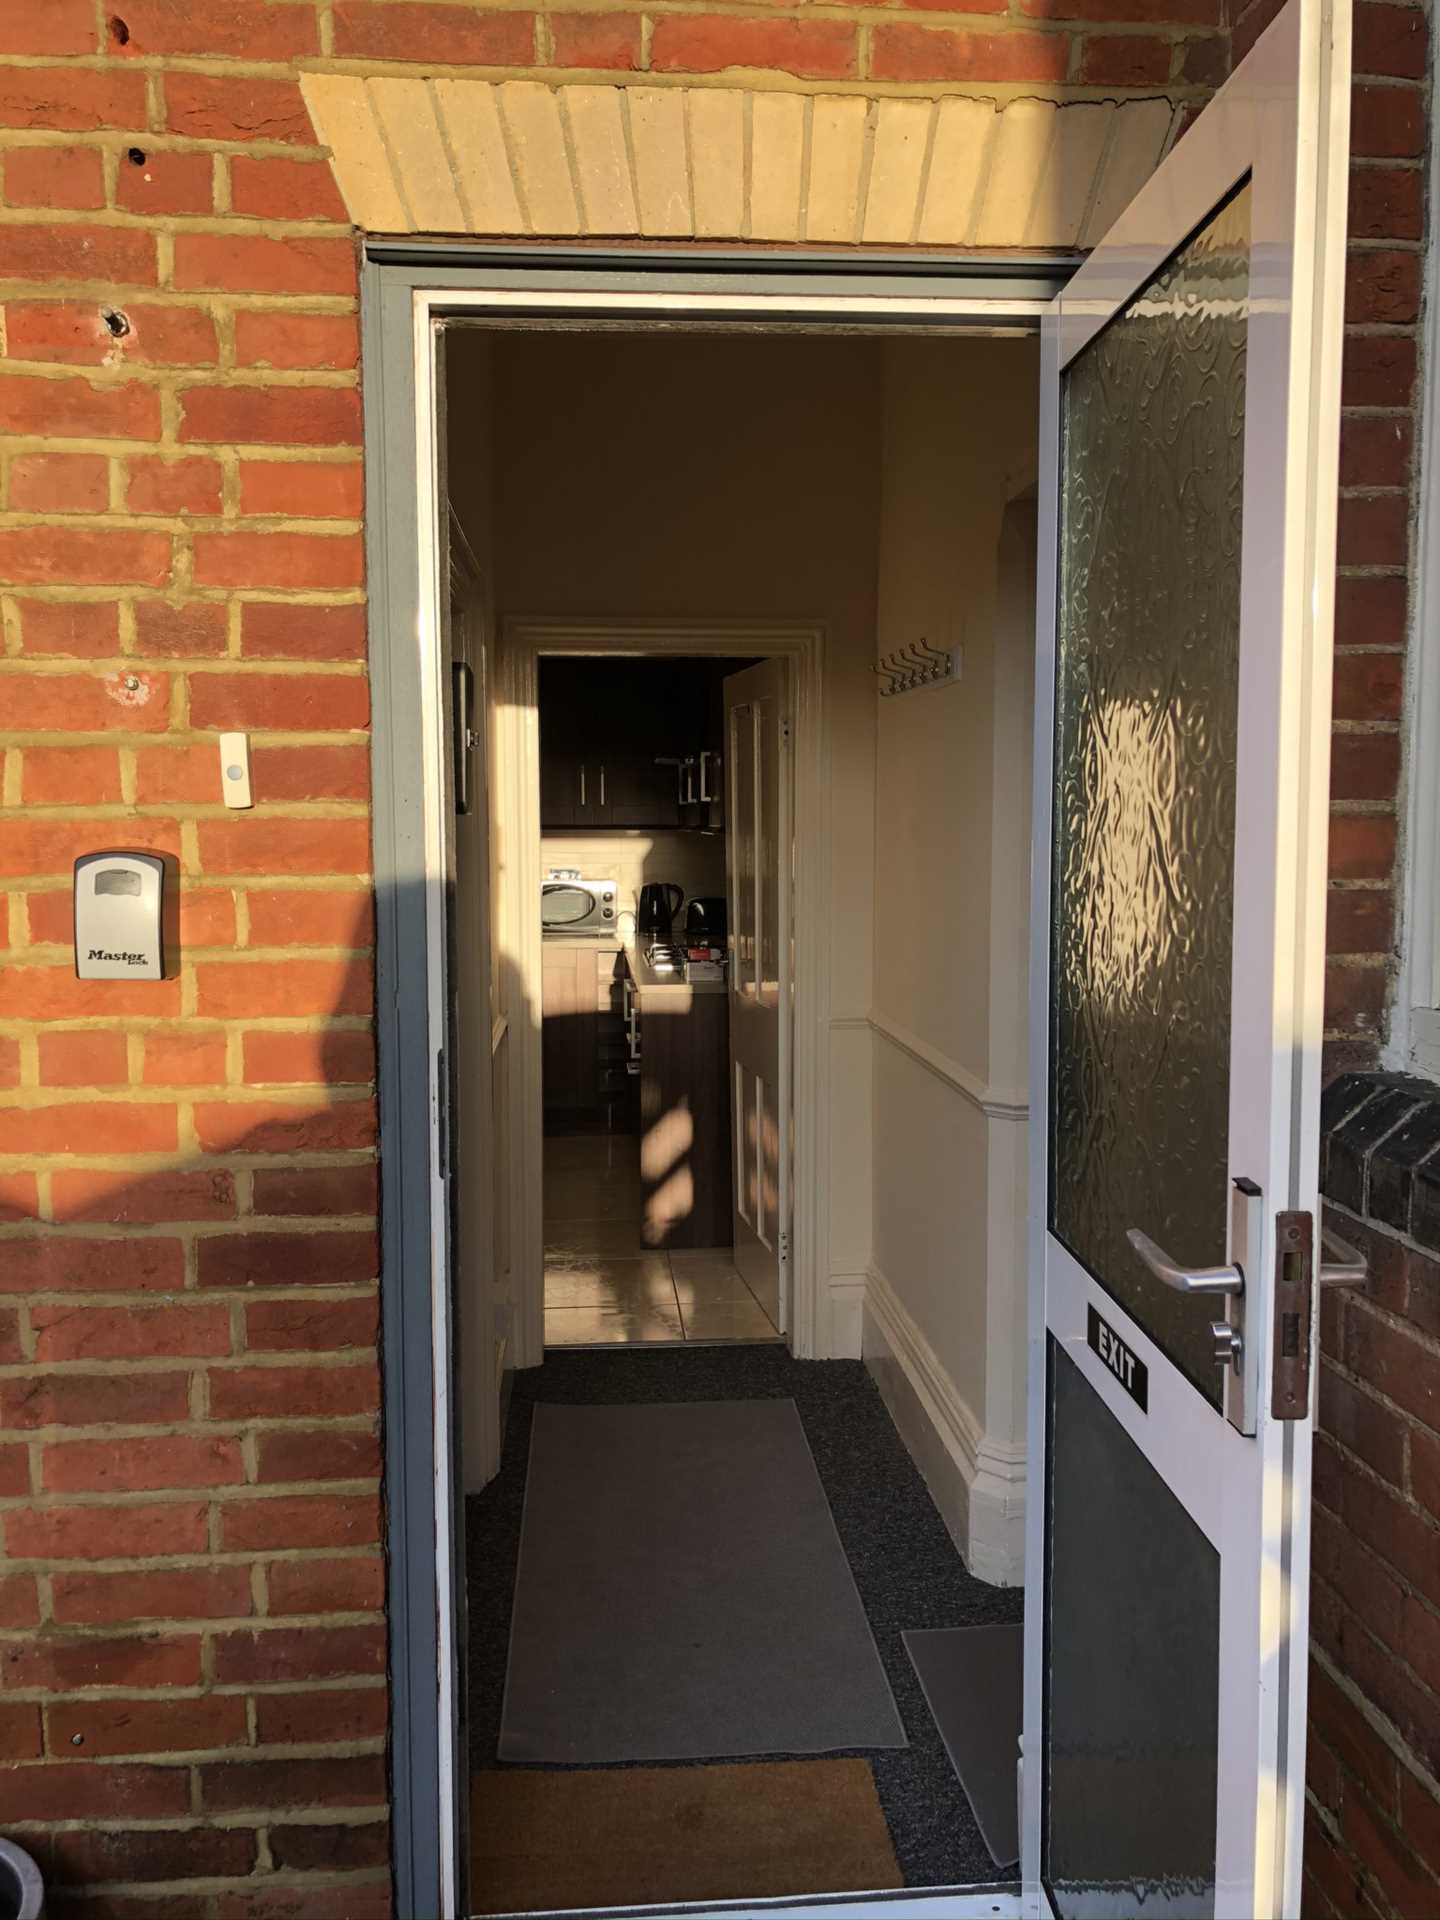 Room 1, 85 Epsom Road,  Guildford Town Centre, GU1 3PA, Image 19